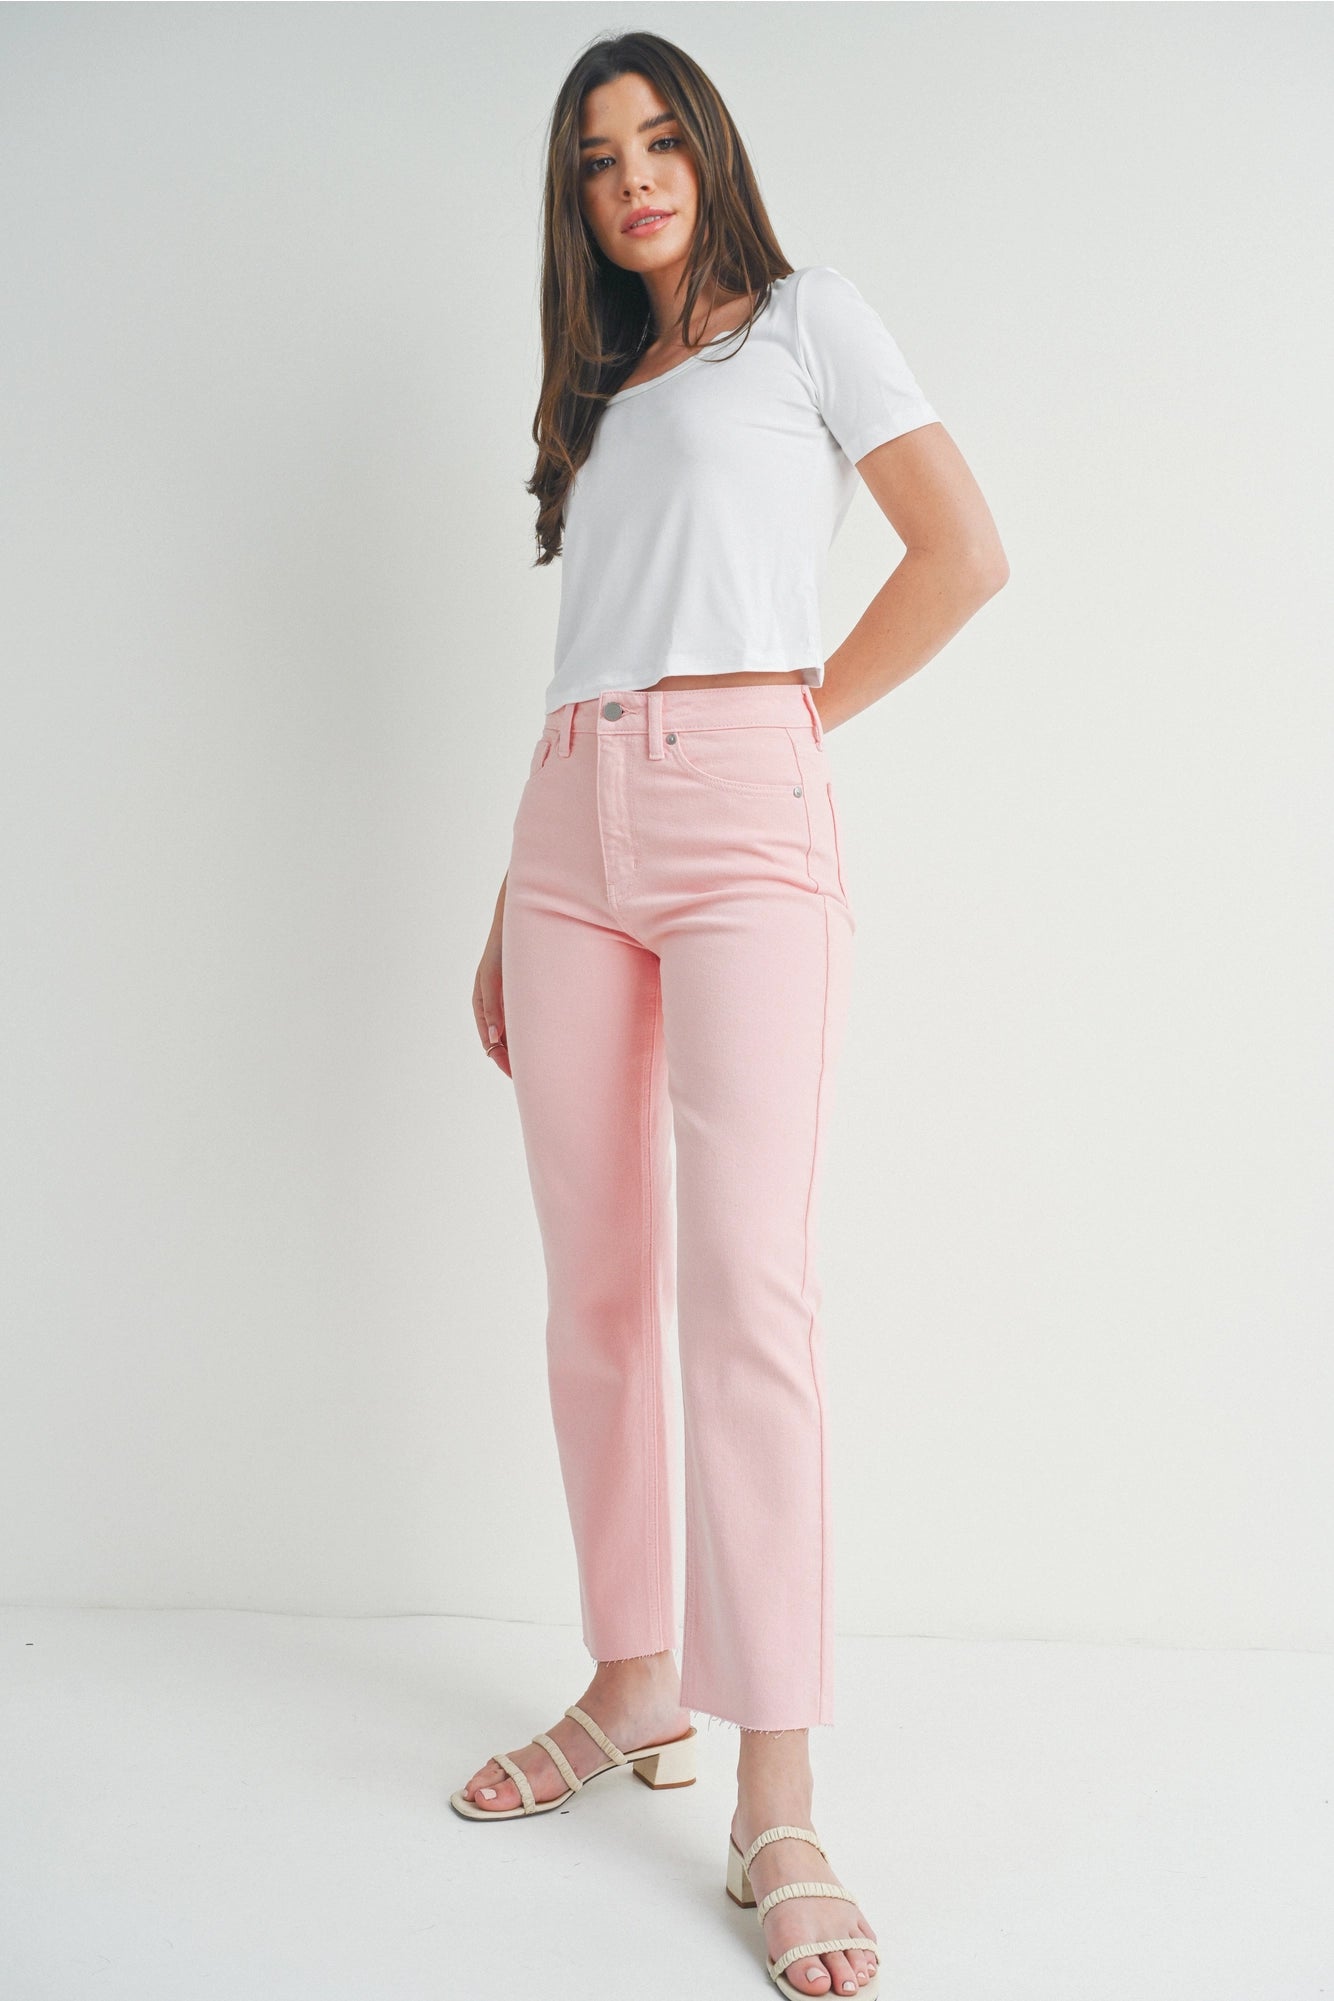 Pinkland Cropped Jeans